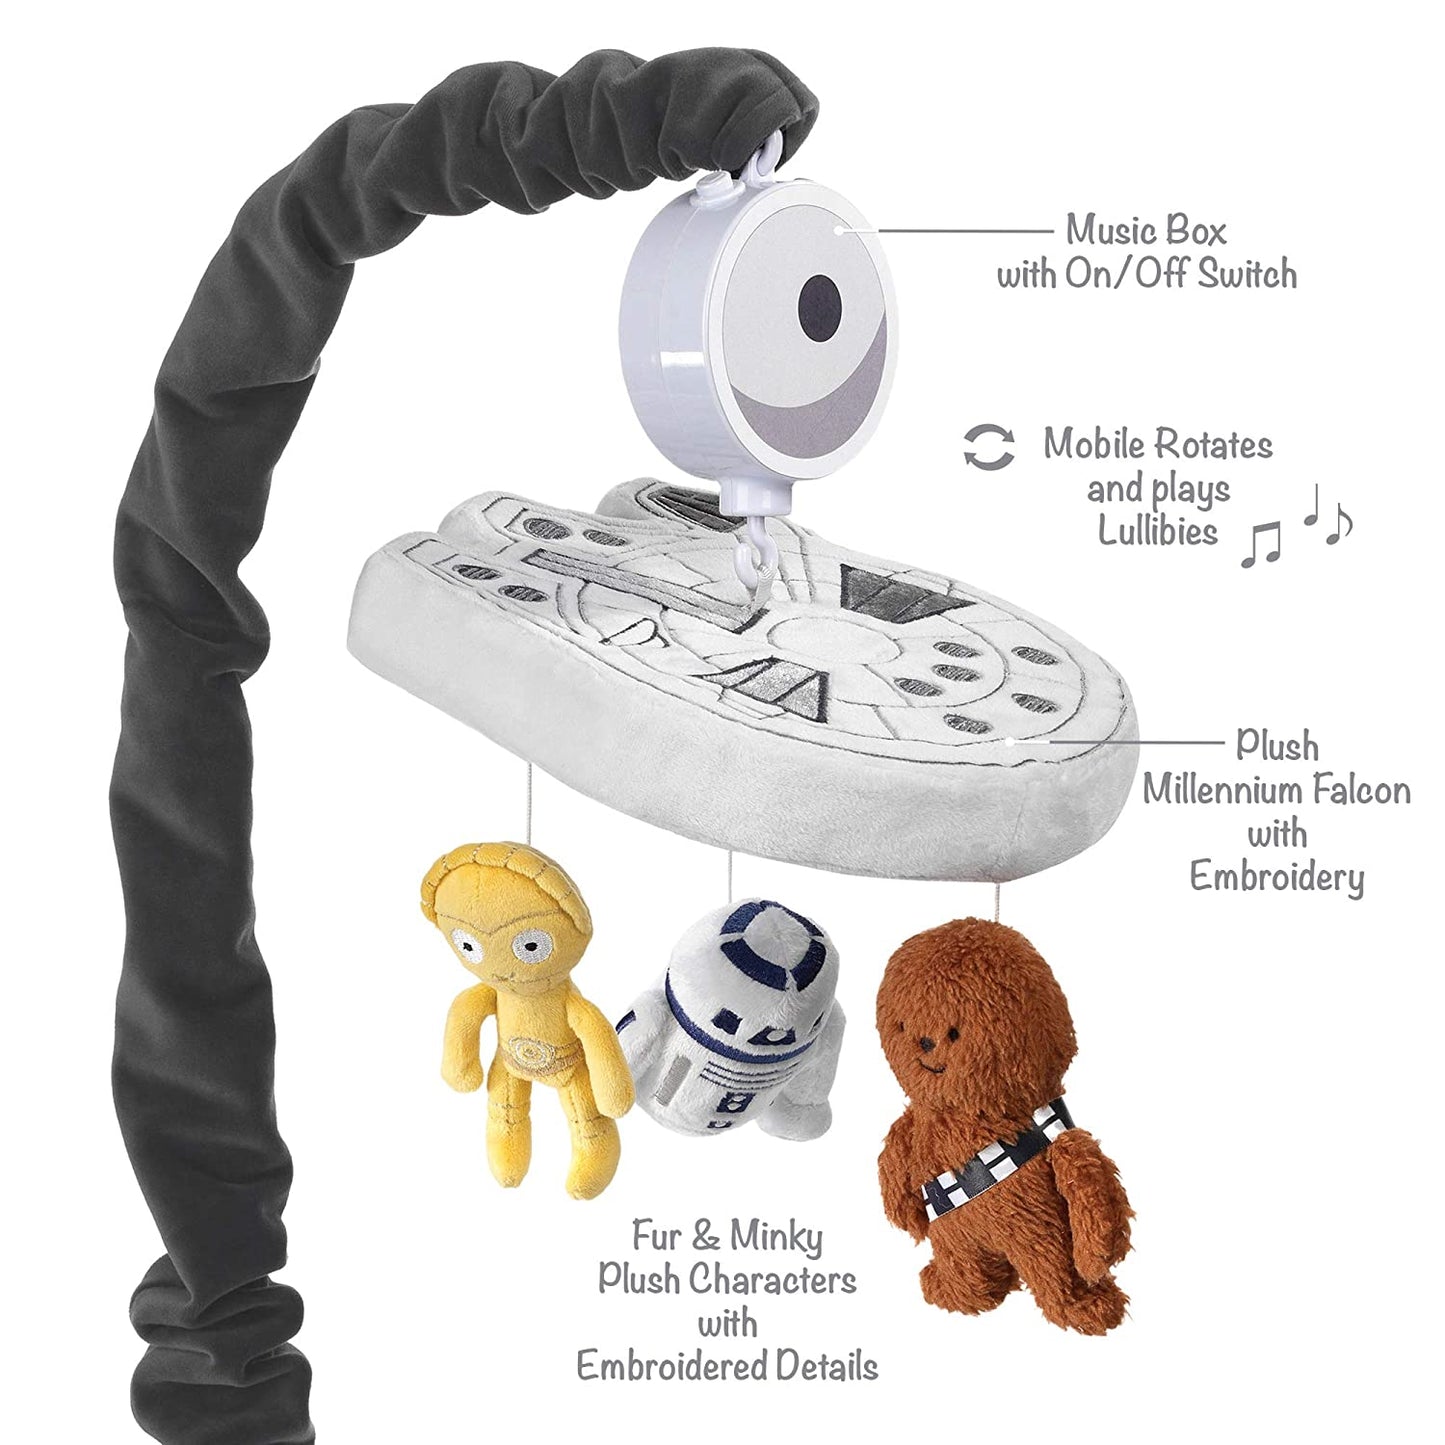 A Star Wars themes baby crib mobile featuring the Millennium Falcon, C3PO, R2D2 and Chewbacca. The features of the mobile are listed, the text reads, 'Music box with on/off Switch. Mobile rotates and plays lullabies, plush Millennium Falcon with embroidery, fur and mink plush characters with embroidered details."